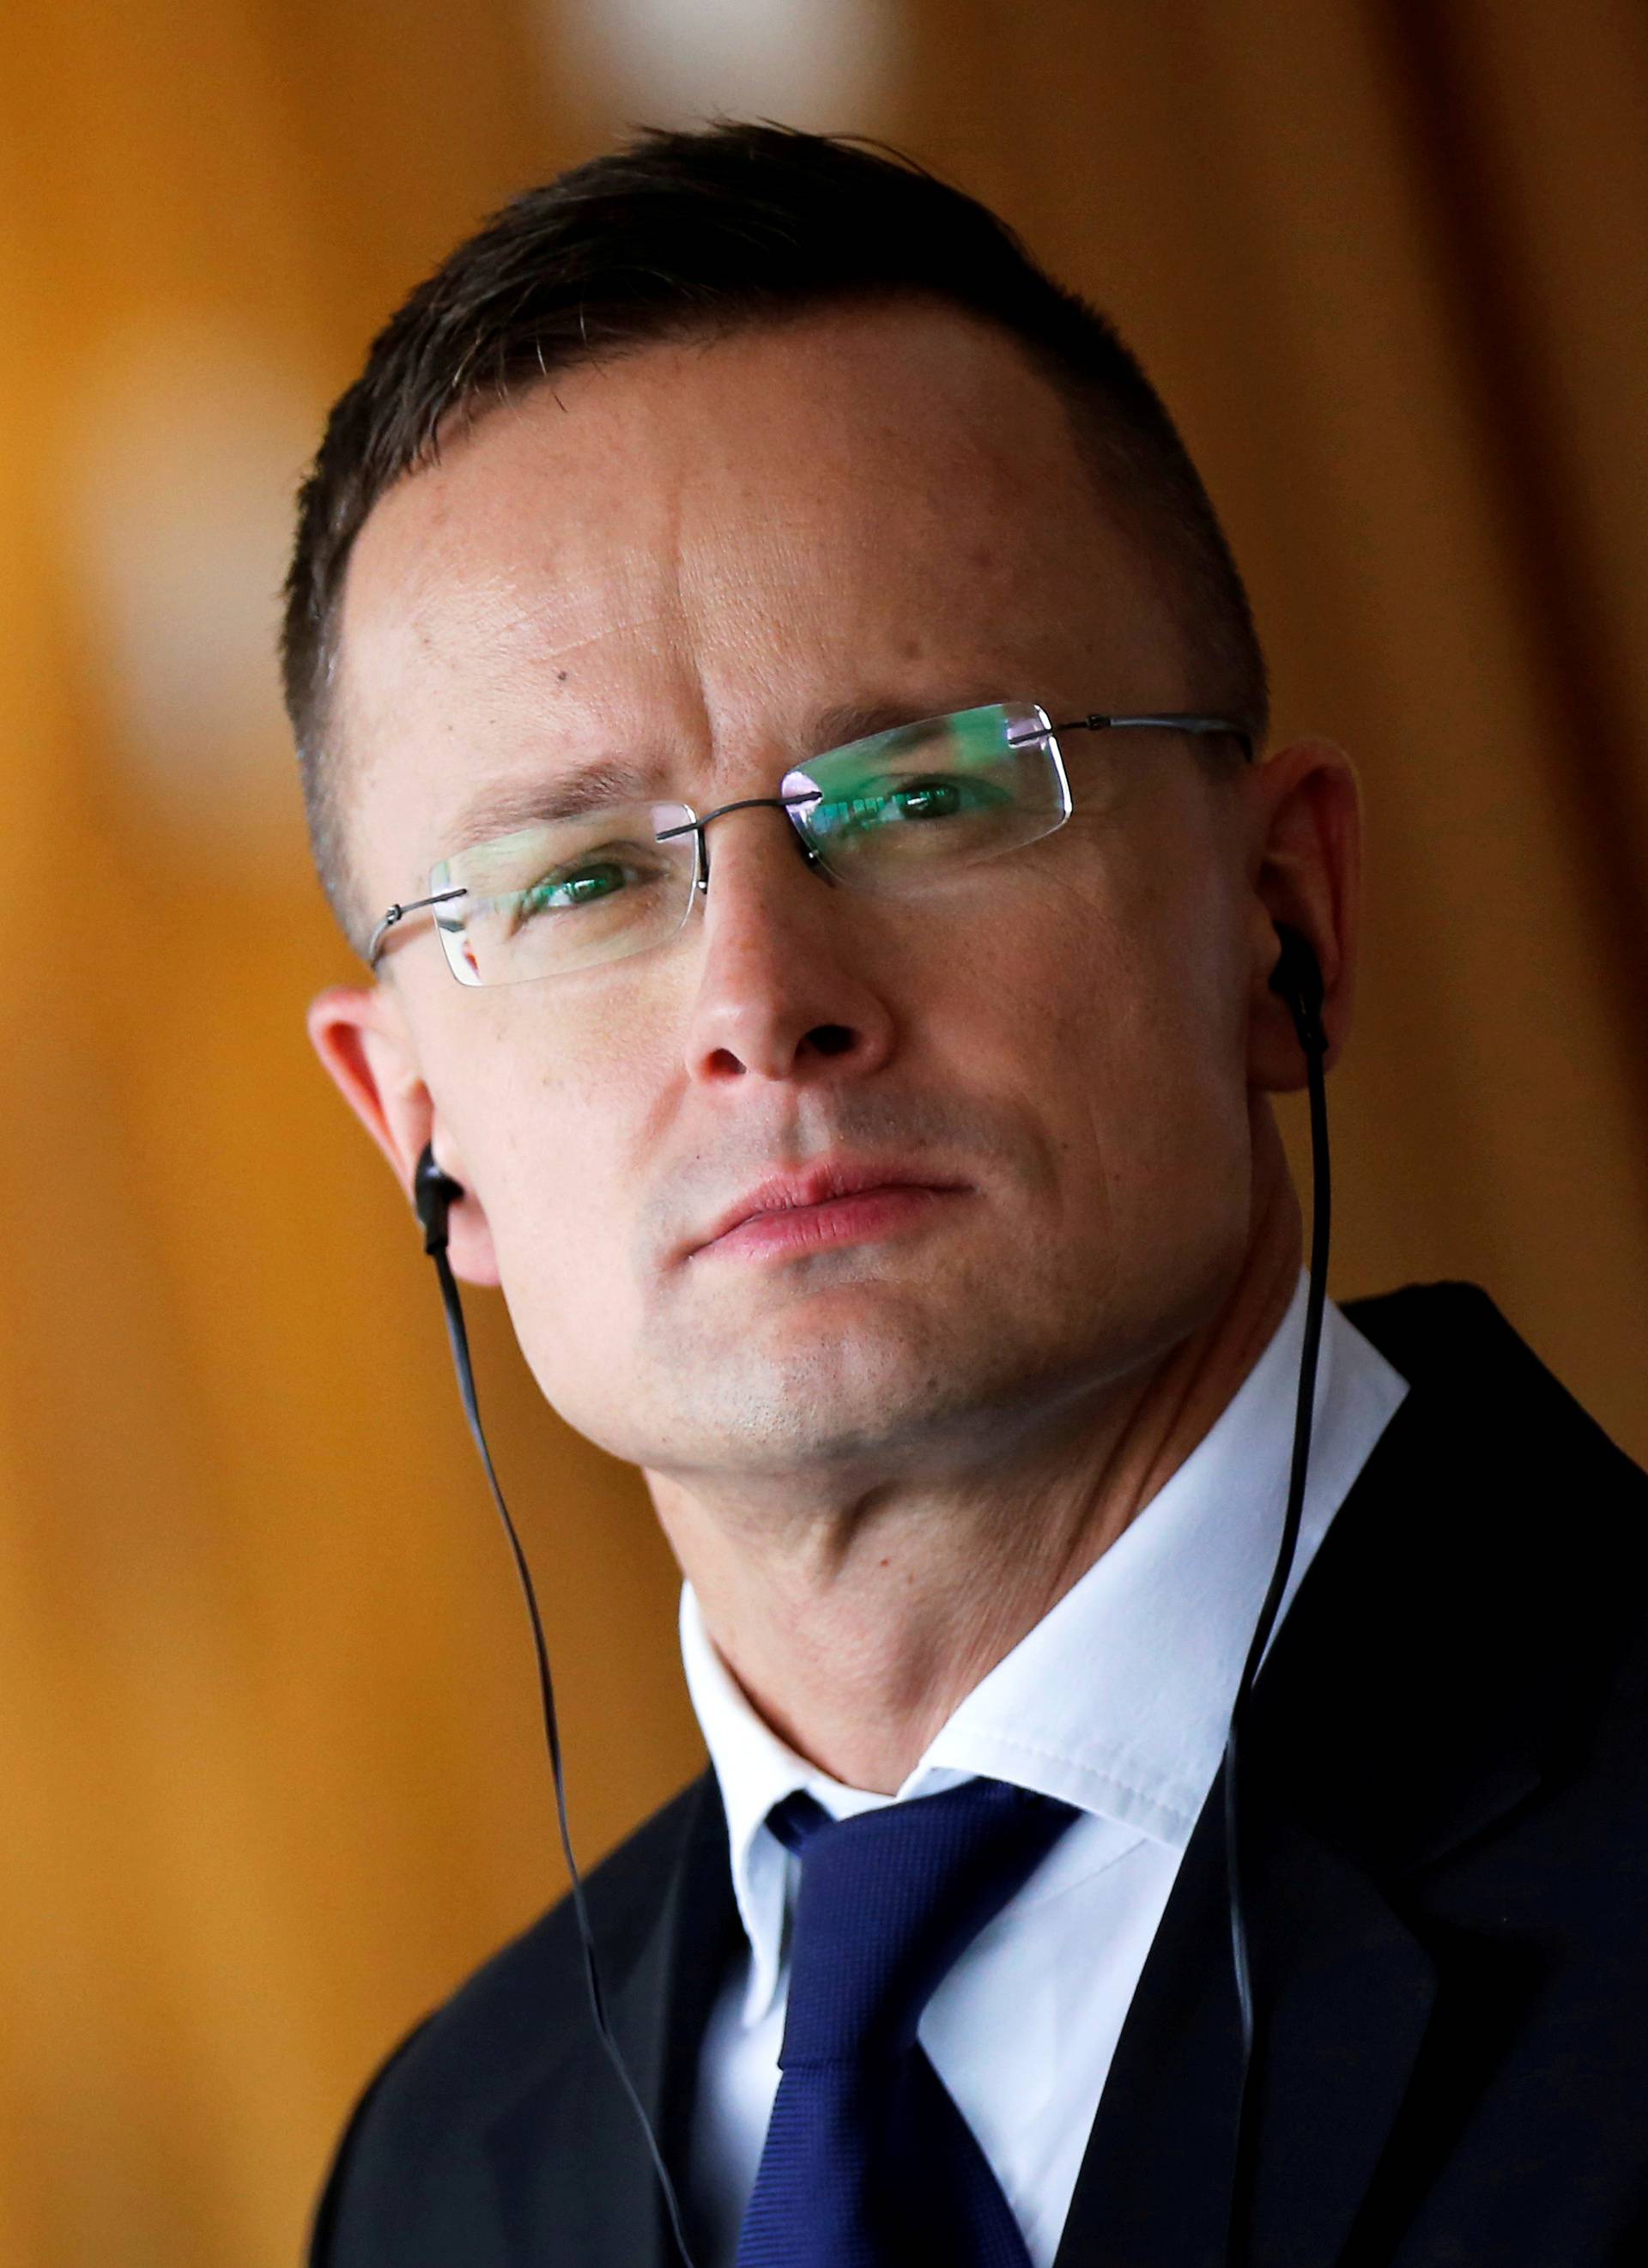 FILE PHOTO: Hungarian Foreign Minister Peter Szijjarto attends a news conference at the Itamaraty Palace in Brasilia